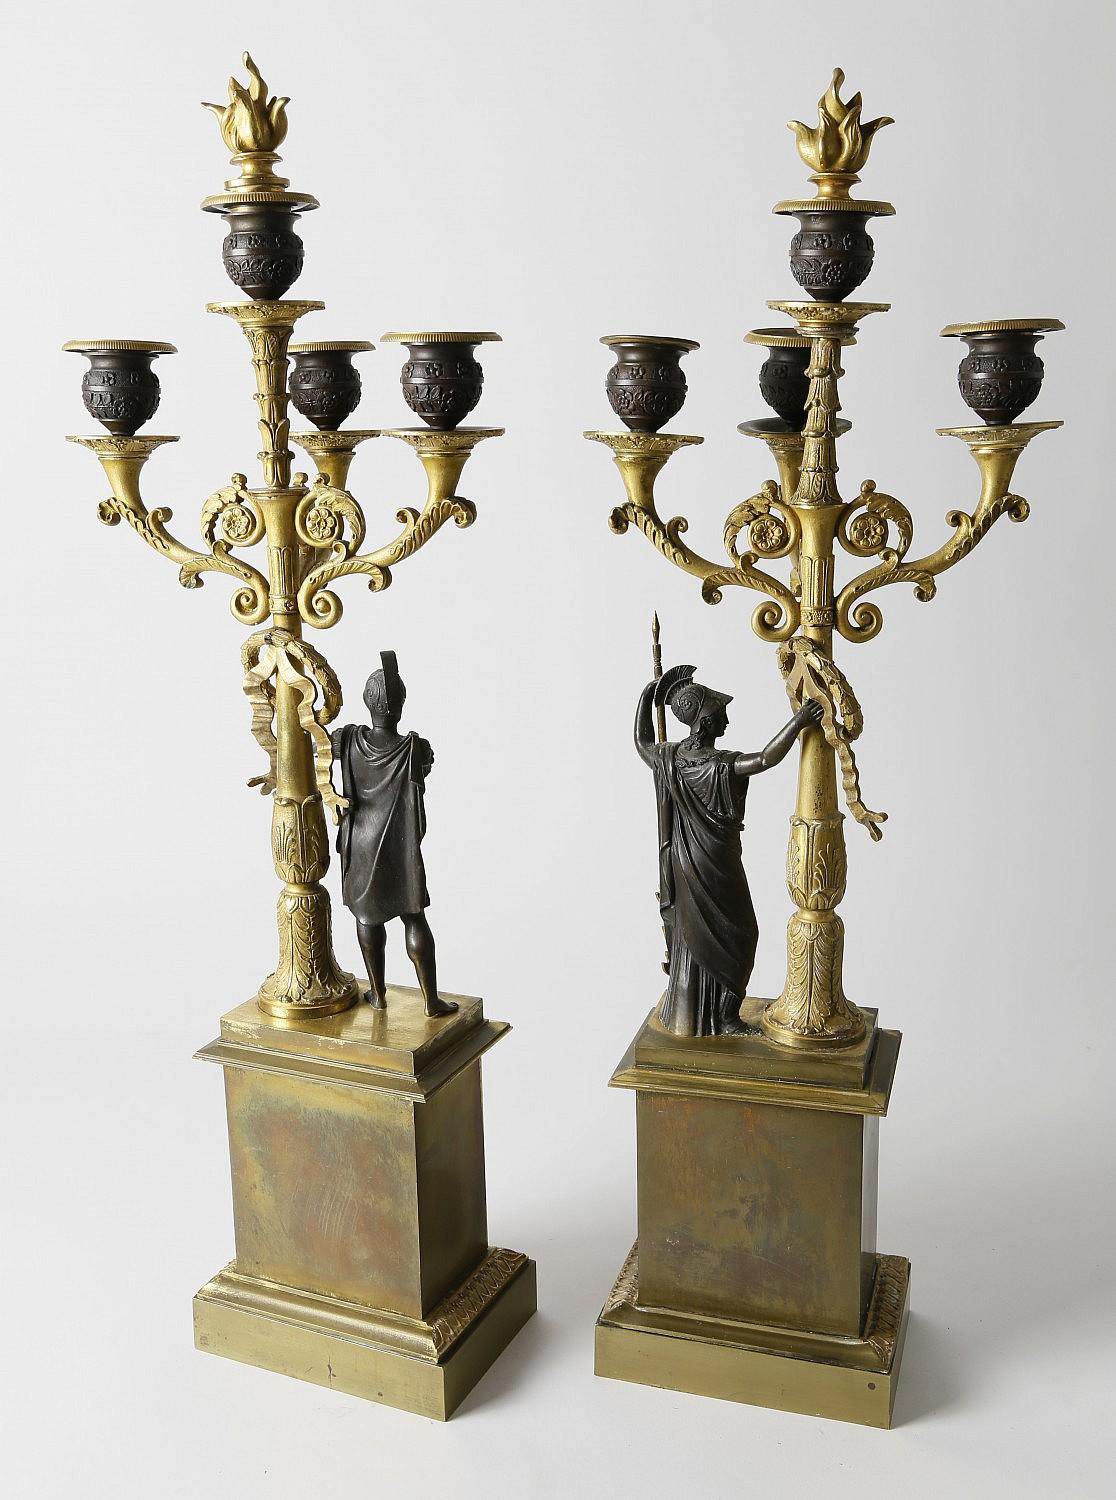 Pair of second (Deuxiéme) Empire French gilt and patinated bronze four-light candelabra, circa 1860.

Second Empire, (1852–70) period in France under the rule of Emperor Napoleon III.

Very fine quality. Very good condition. Normal wear